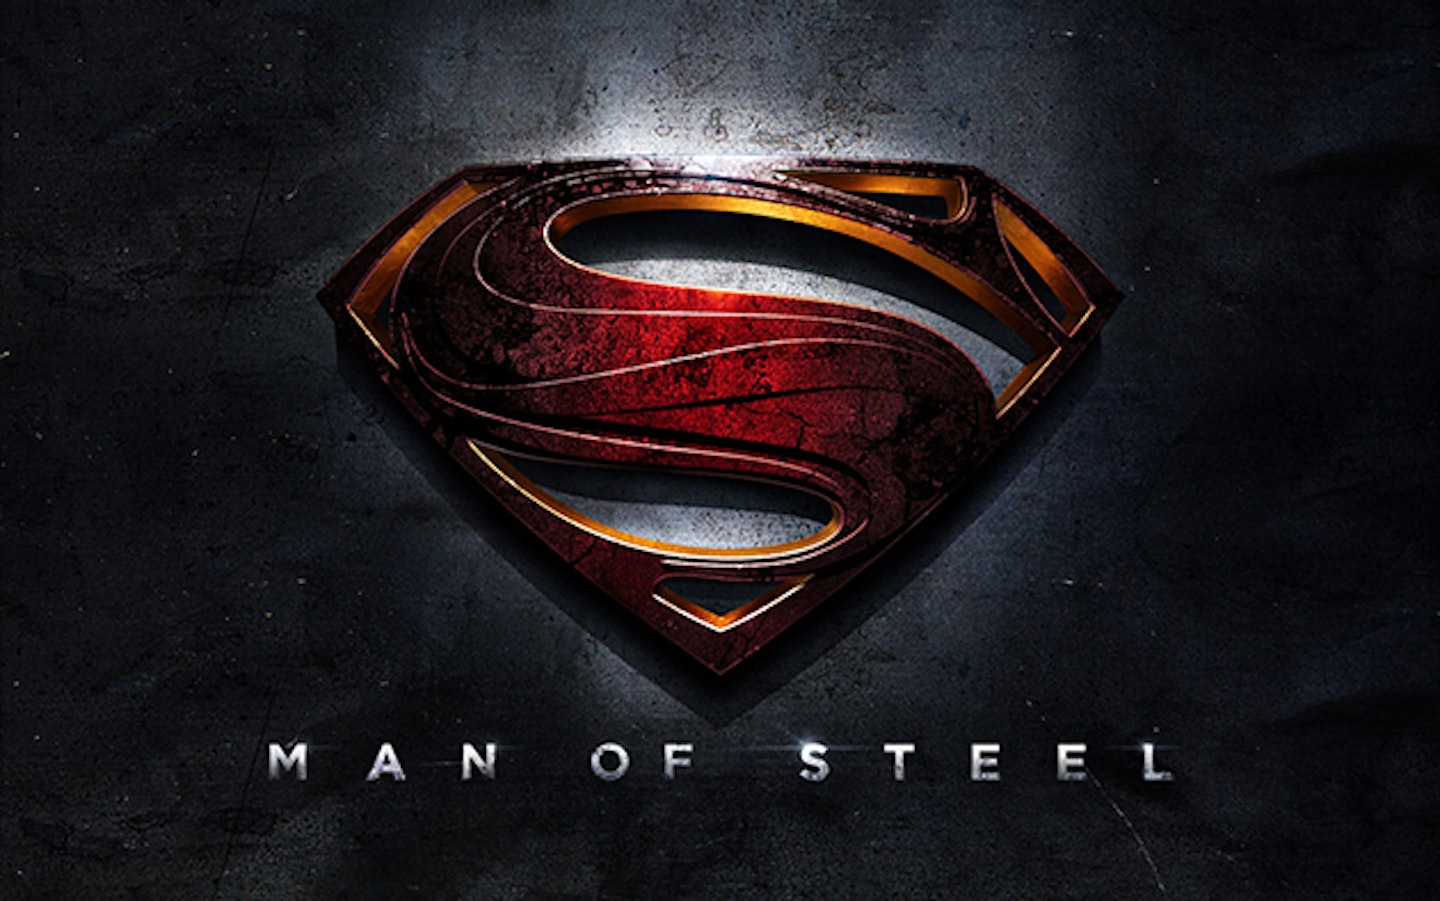 When was Superman first referred to as the “Man of Steel”? - Superman  Homepage